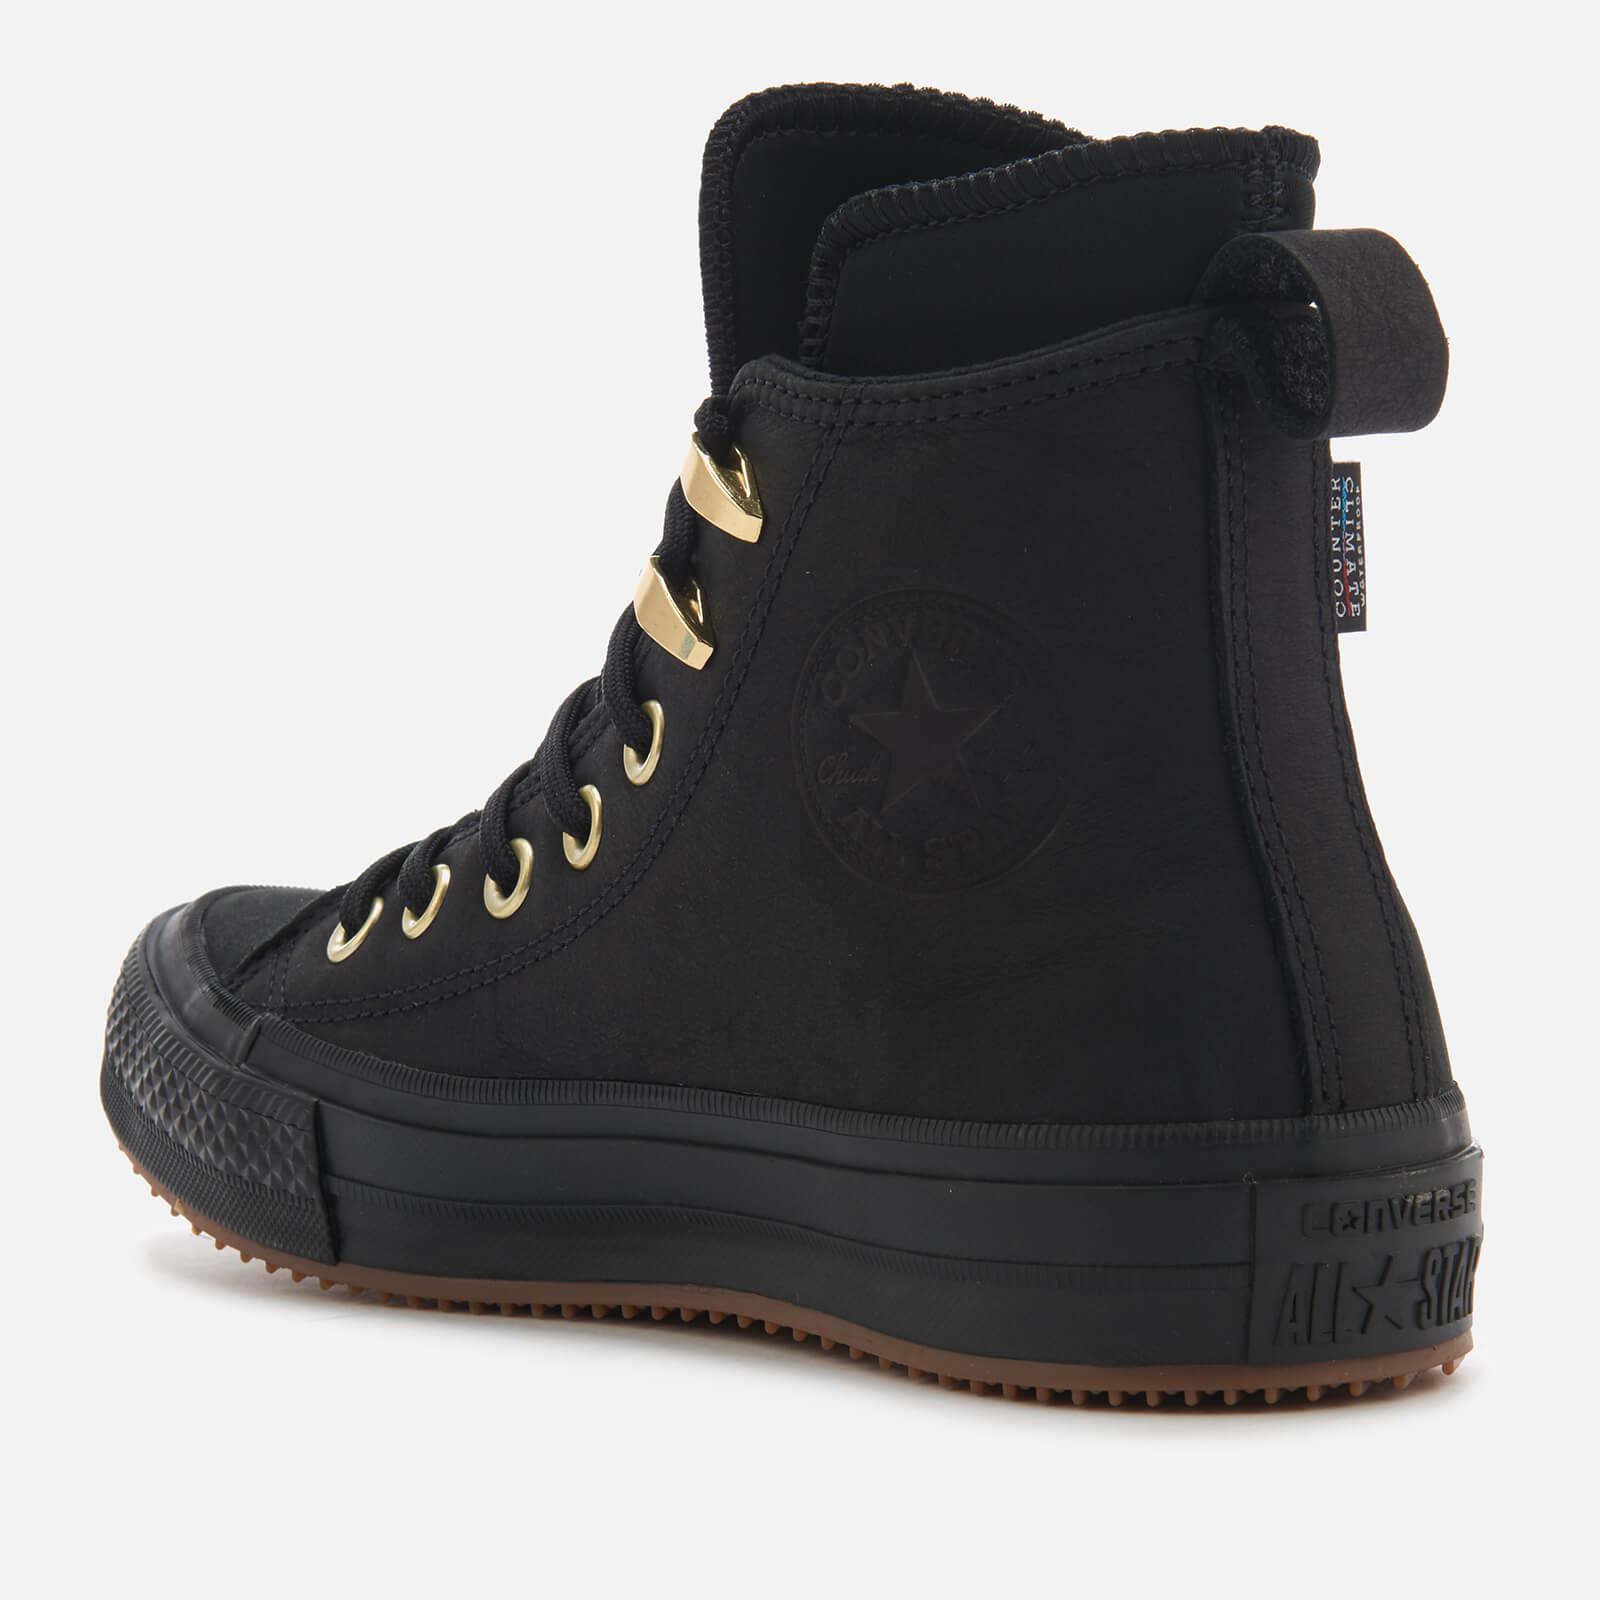 Converse Rubber Chuck Taylor All Star Waterproof Boots in Black | Lyst